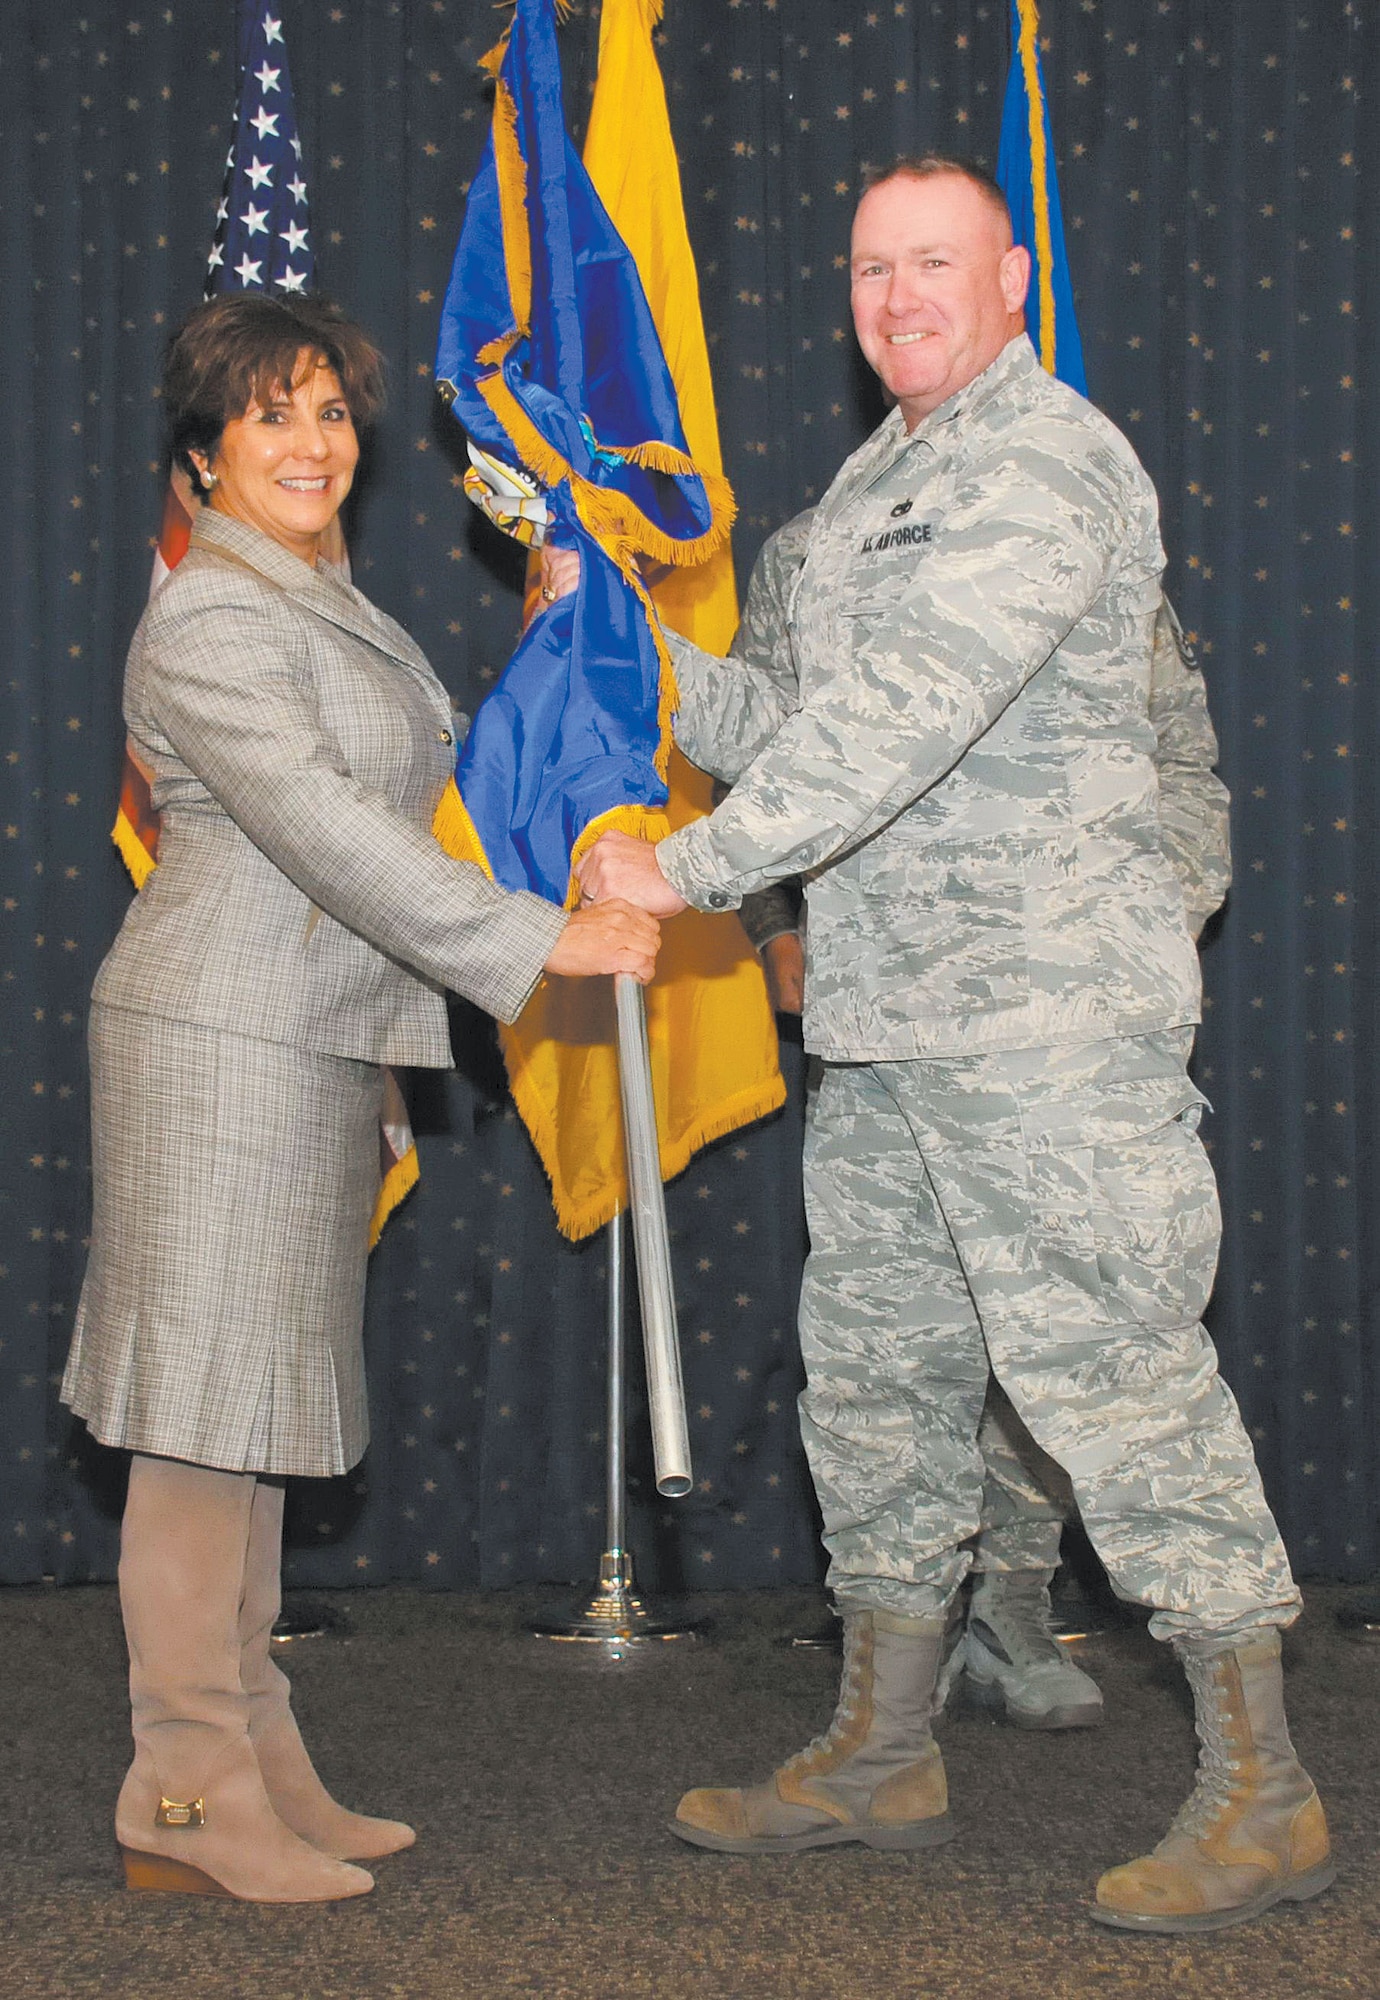 Honorary commanders inducted > Kirtland Air Force Base > Article